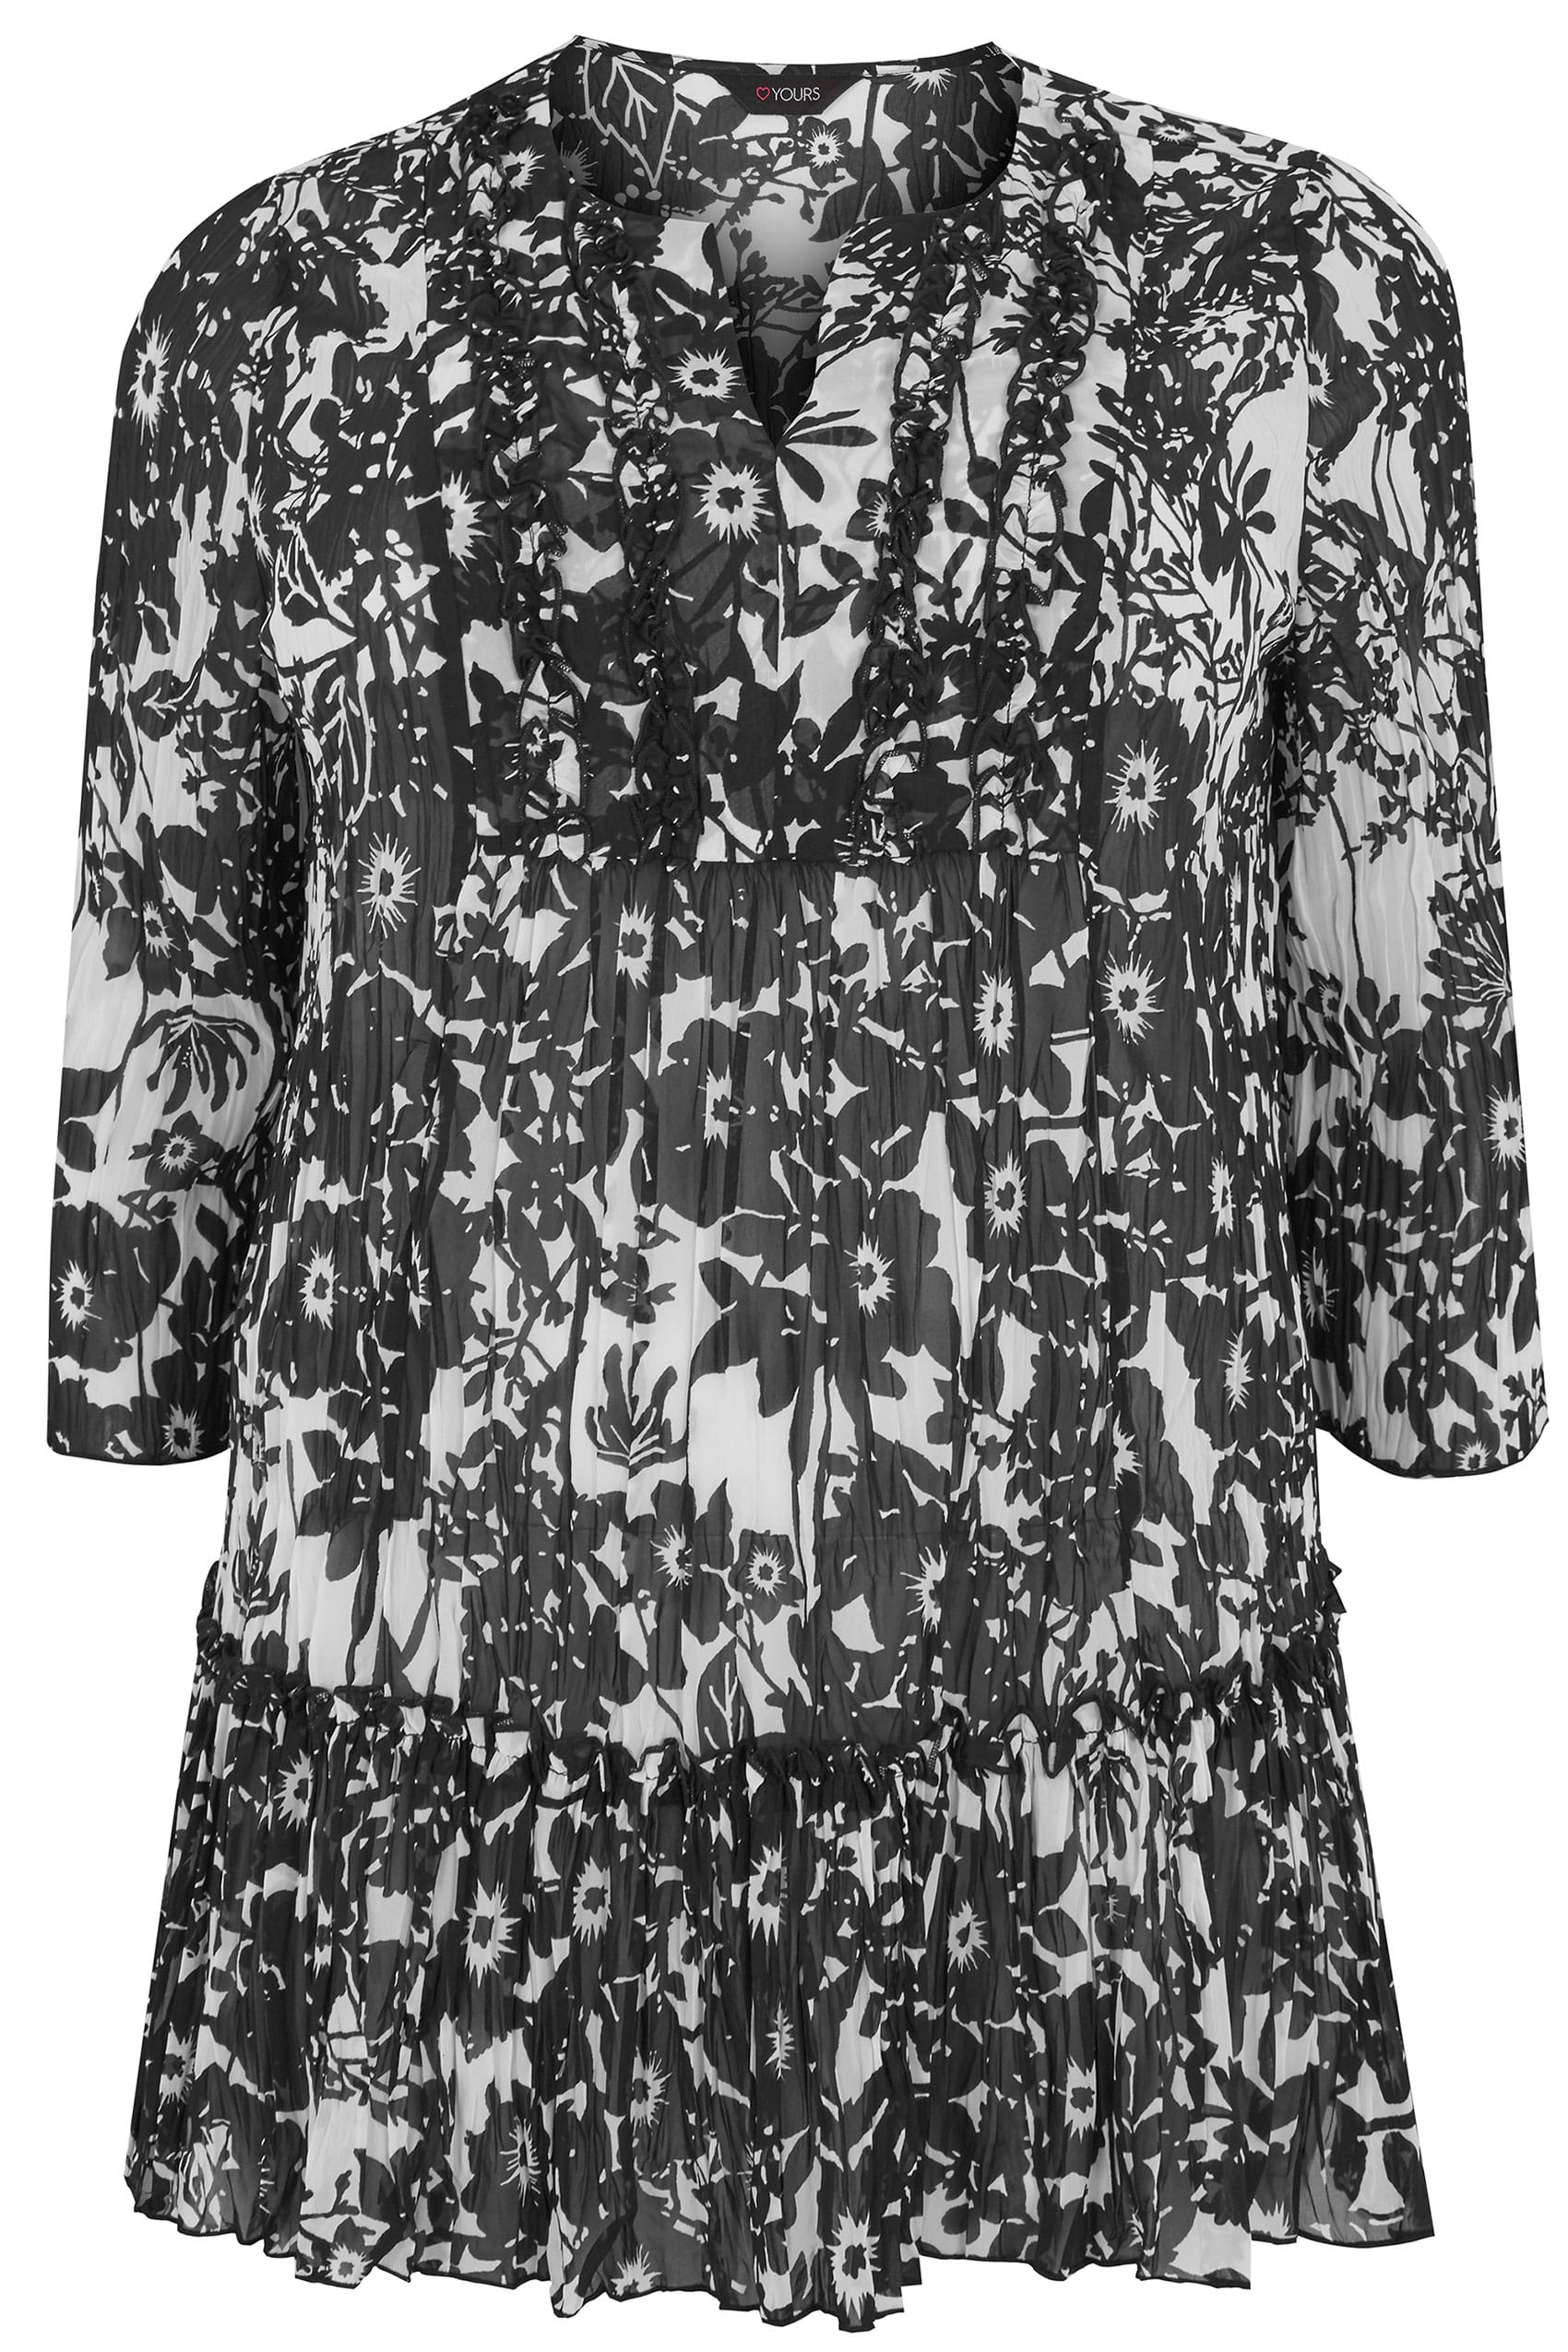 Black & White Floral Print Crinkled Blouse, plus size 16 to 36